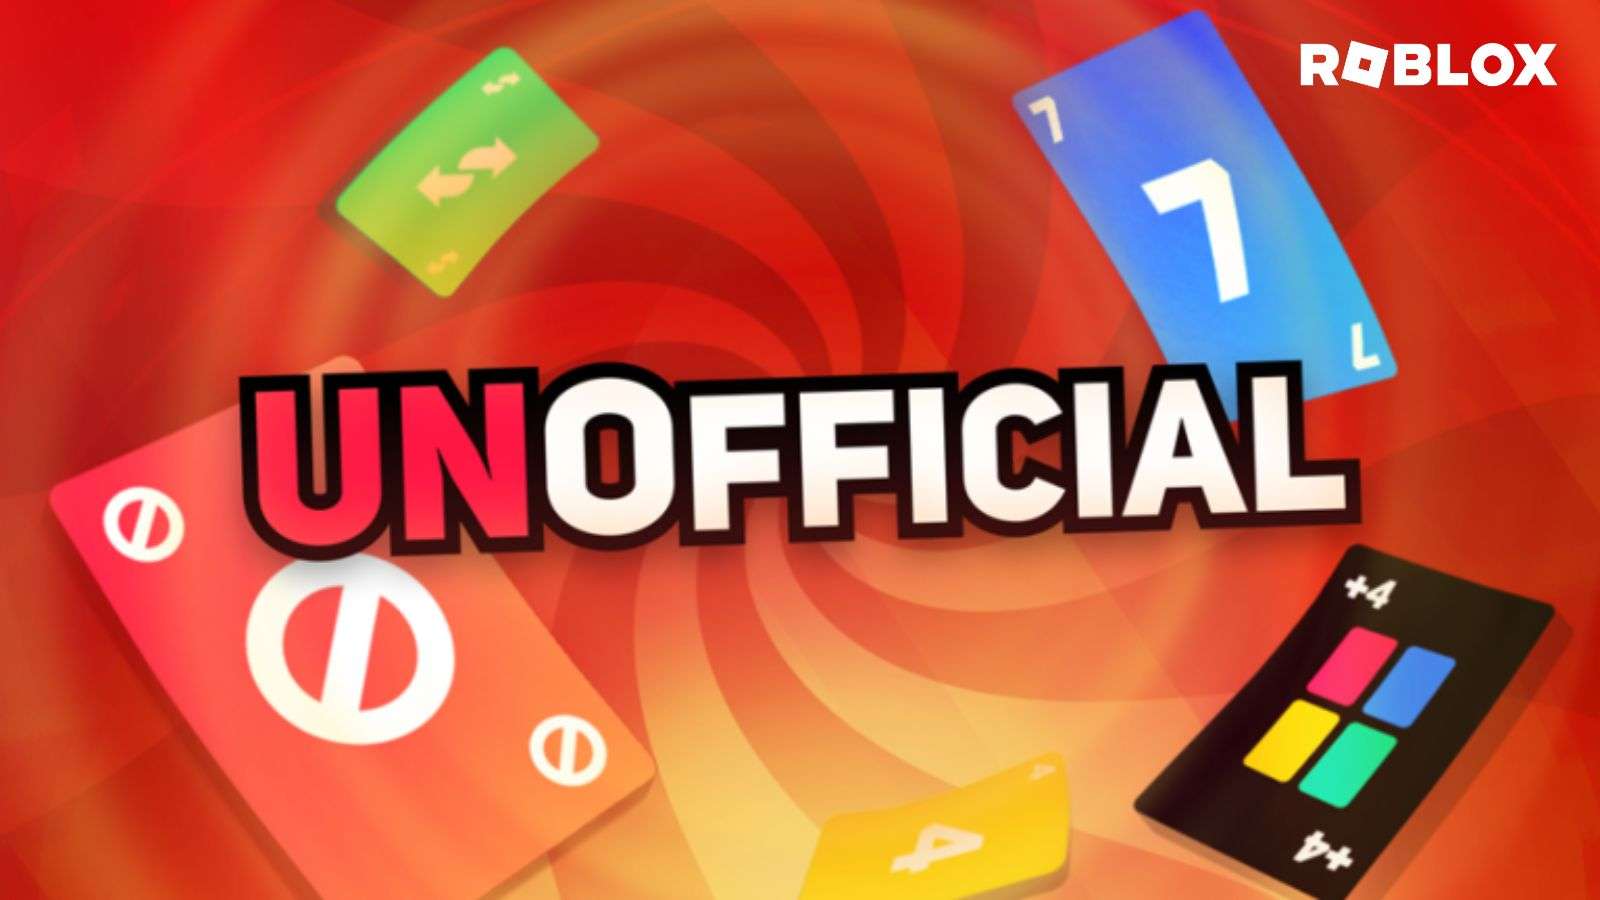 UNOfficial on Roblox